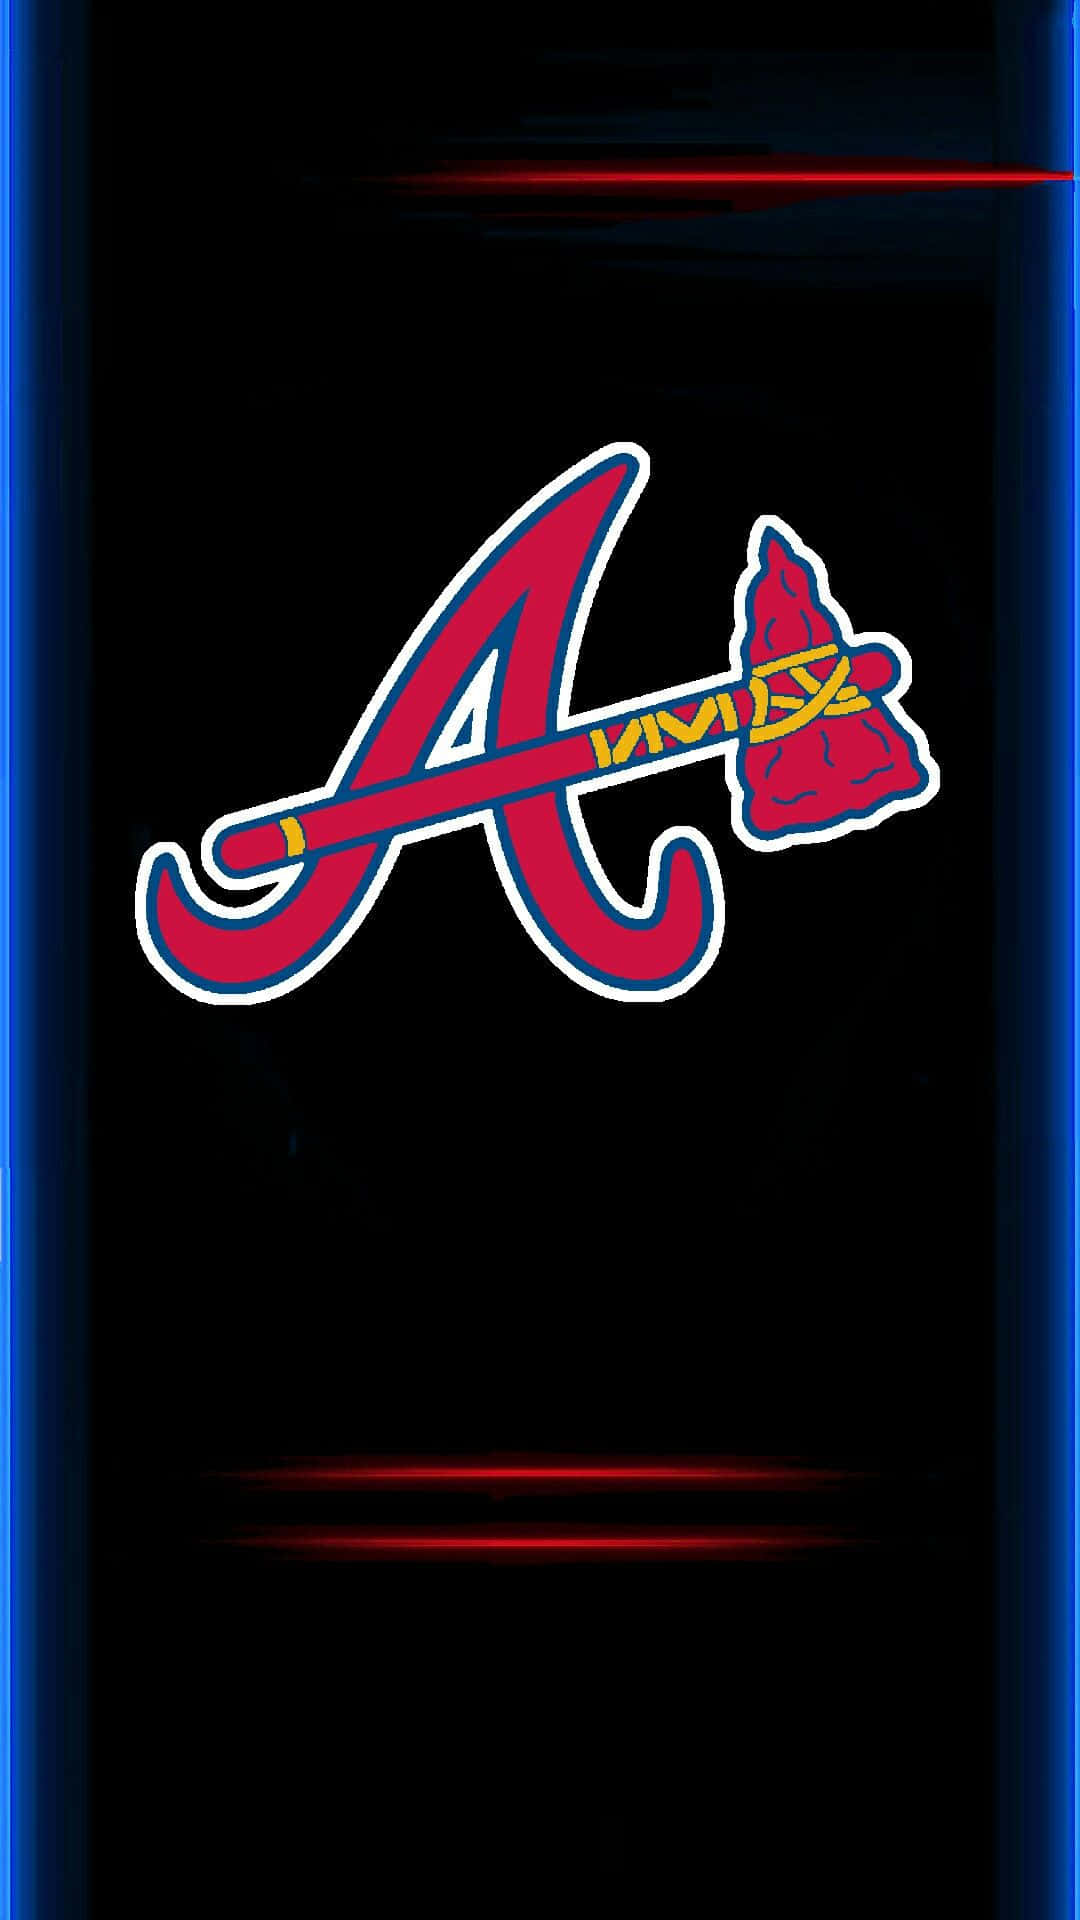 Get the official Atlanta Braves logo wallpaper for your iPhone Wallpaper